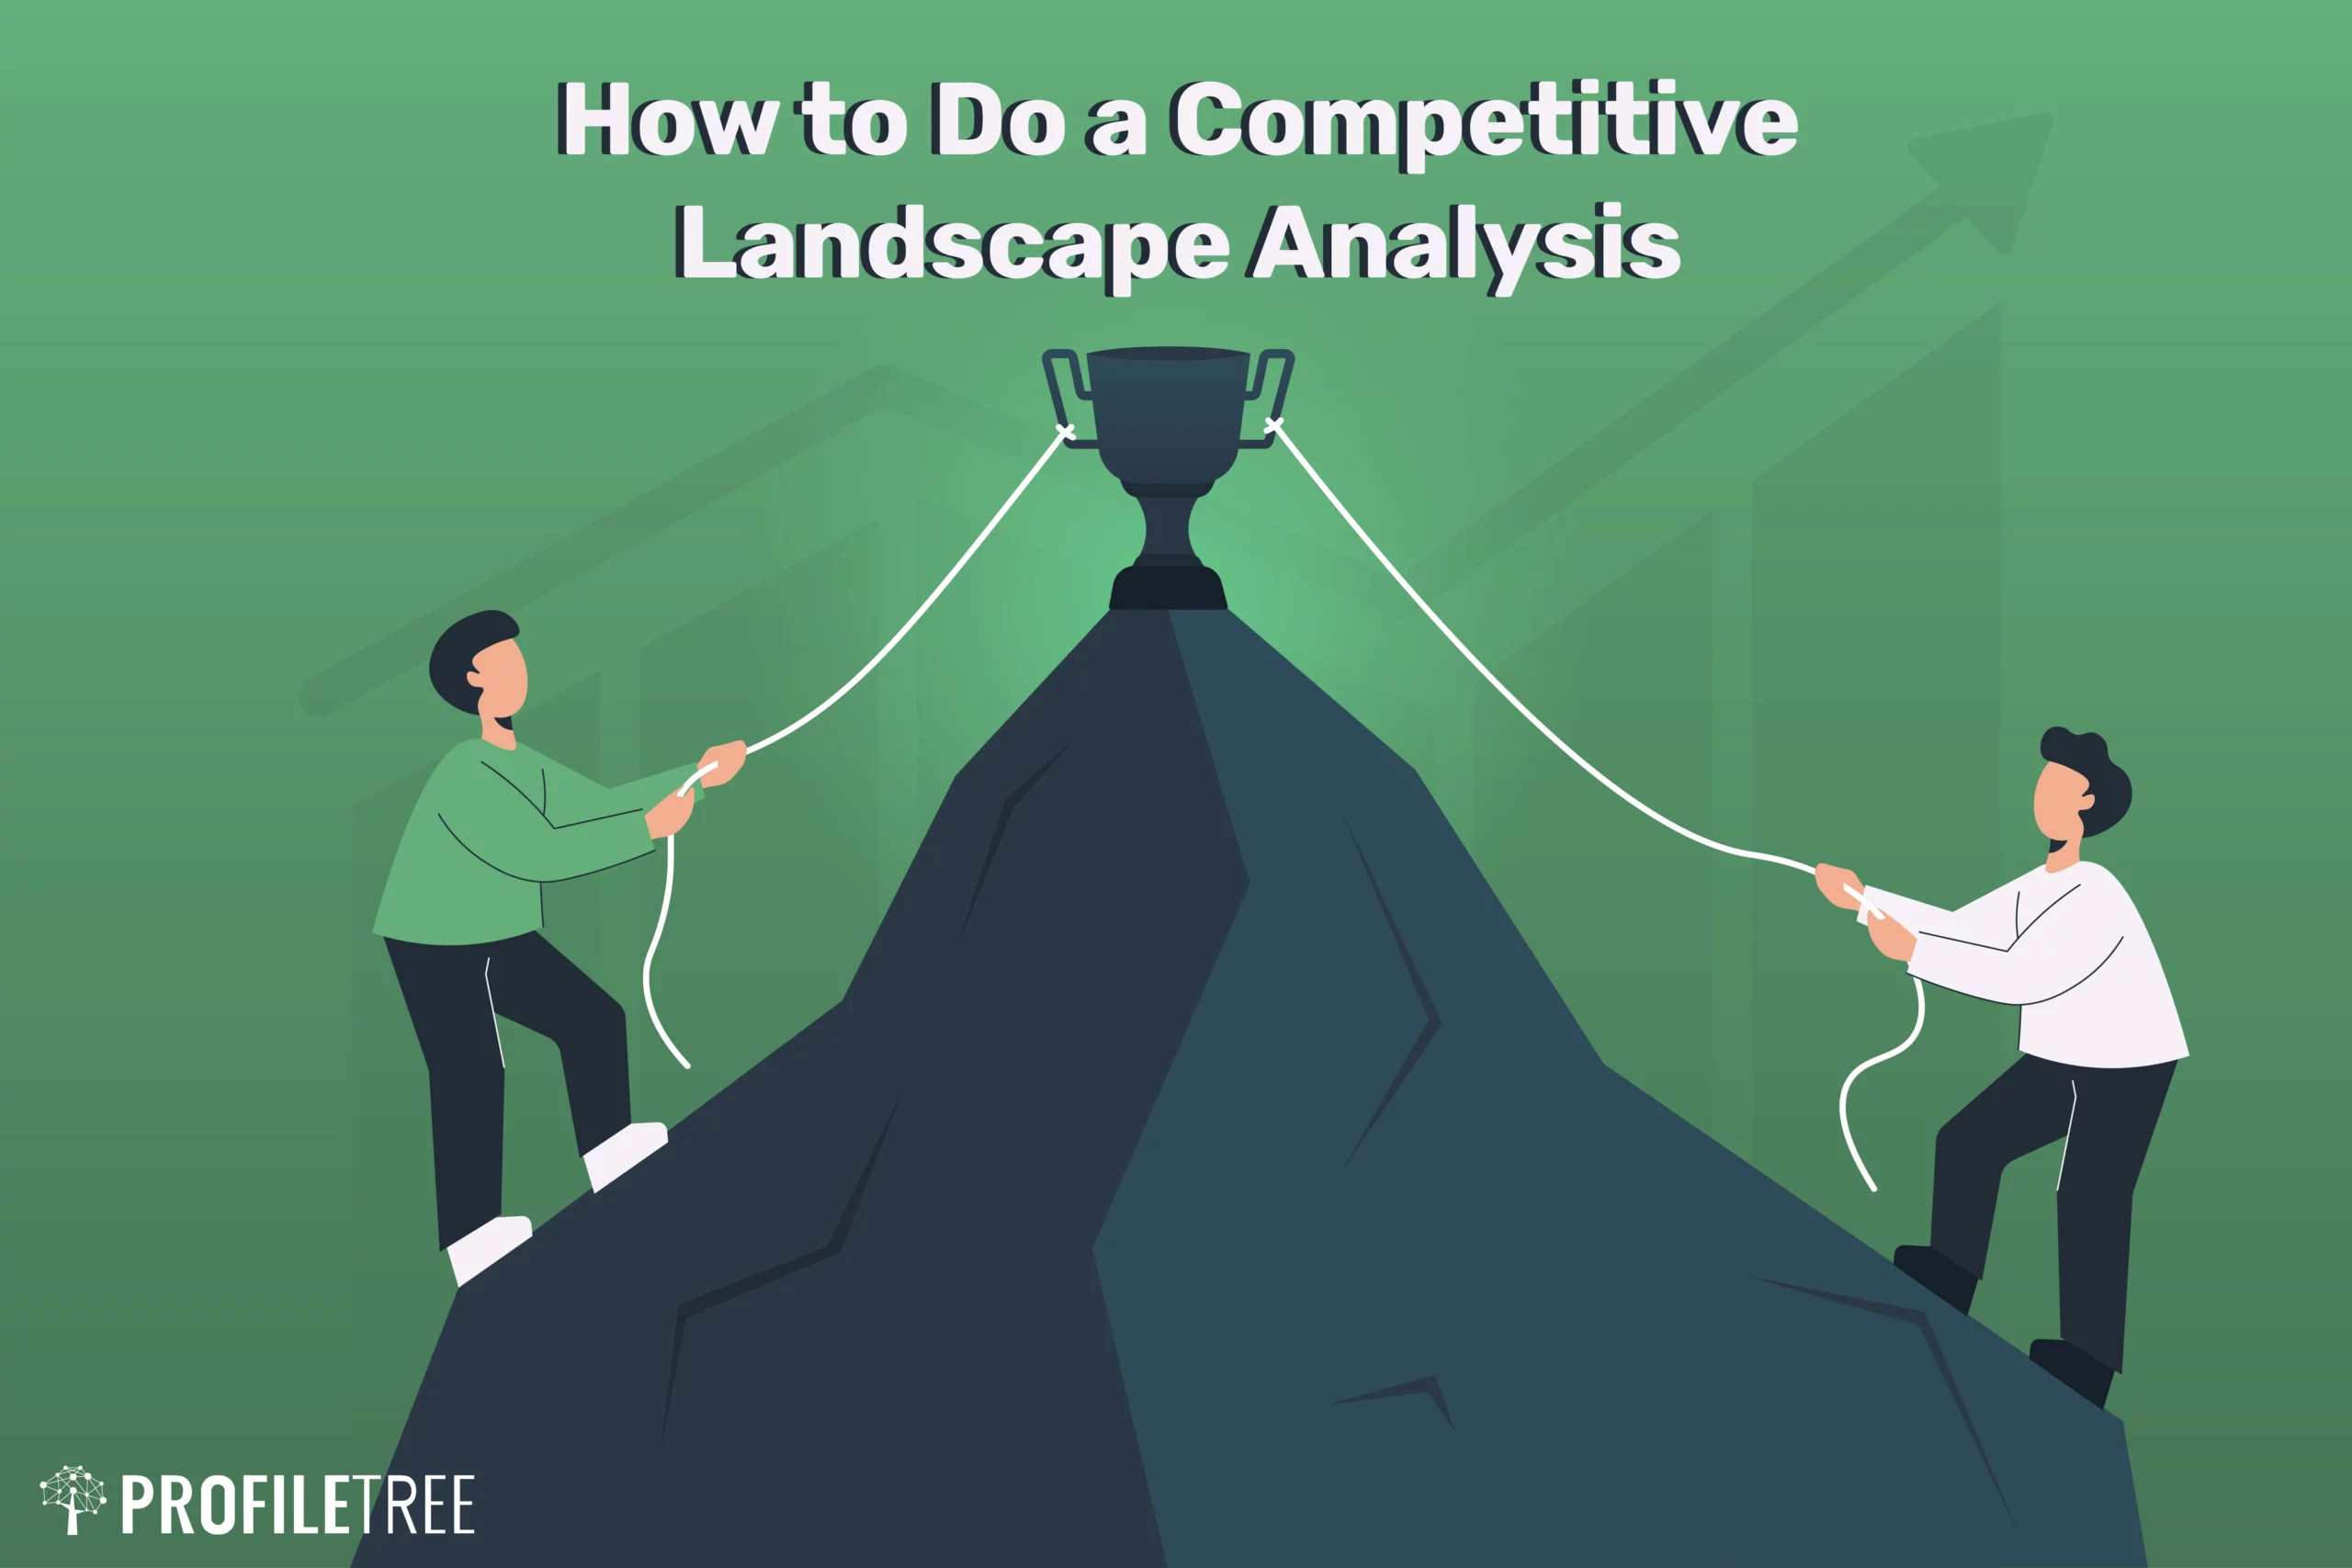 How to Do a Competitive Landscape Analysis